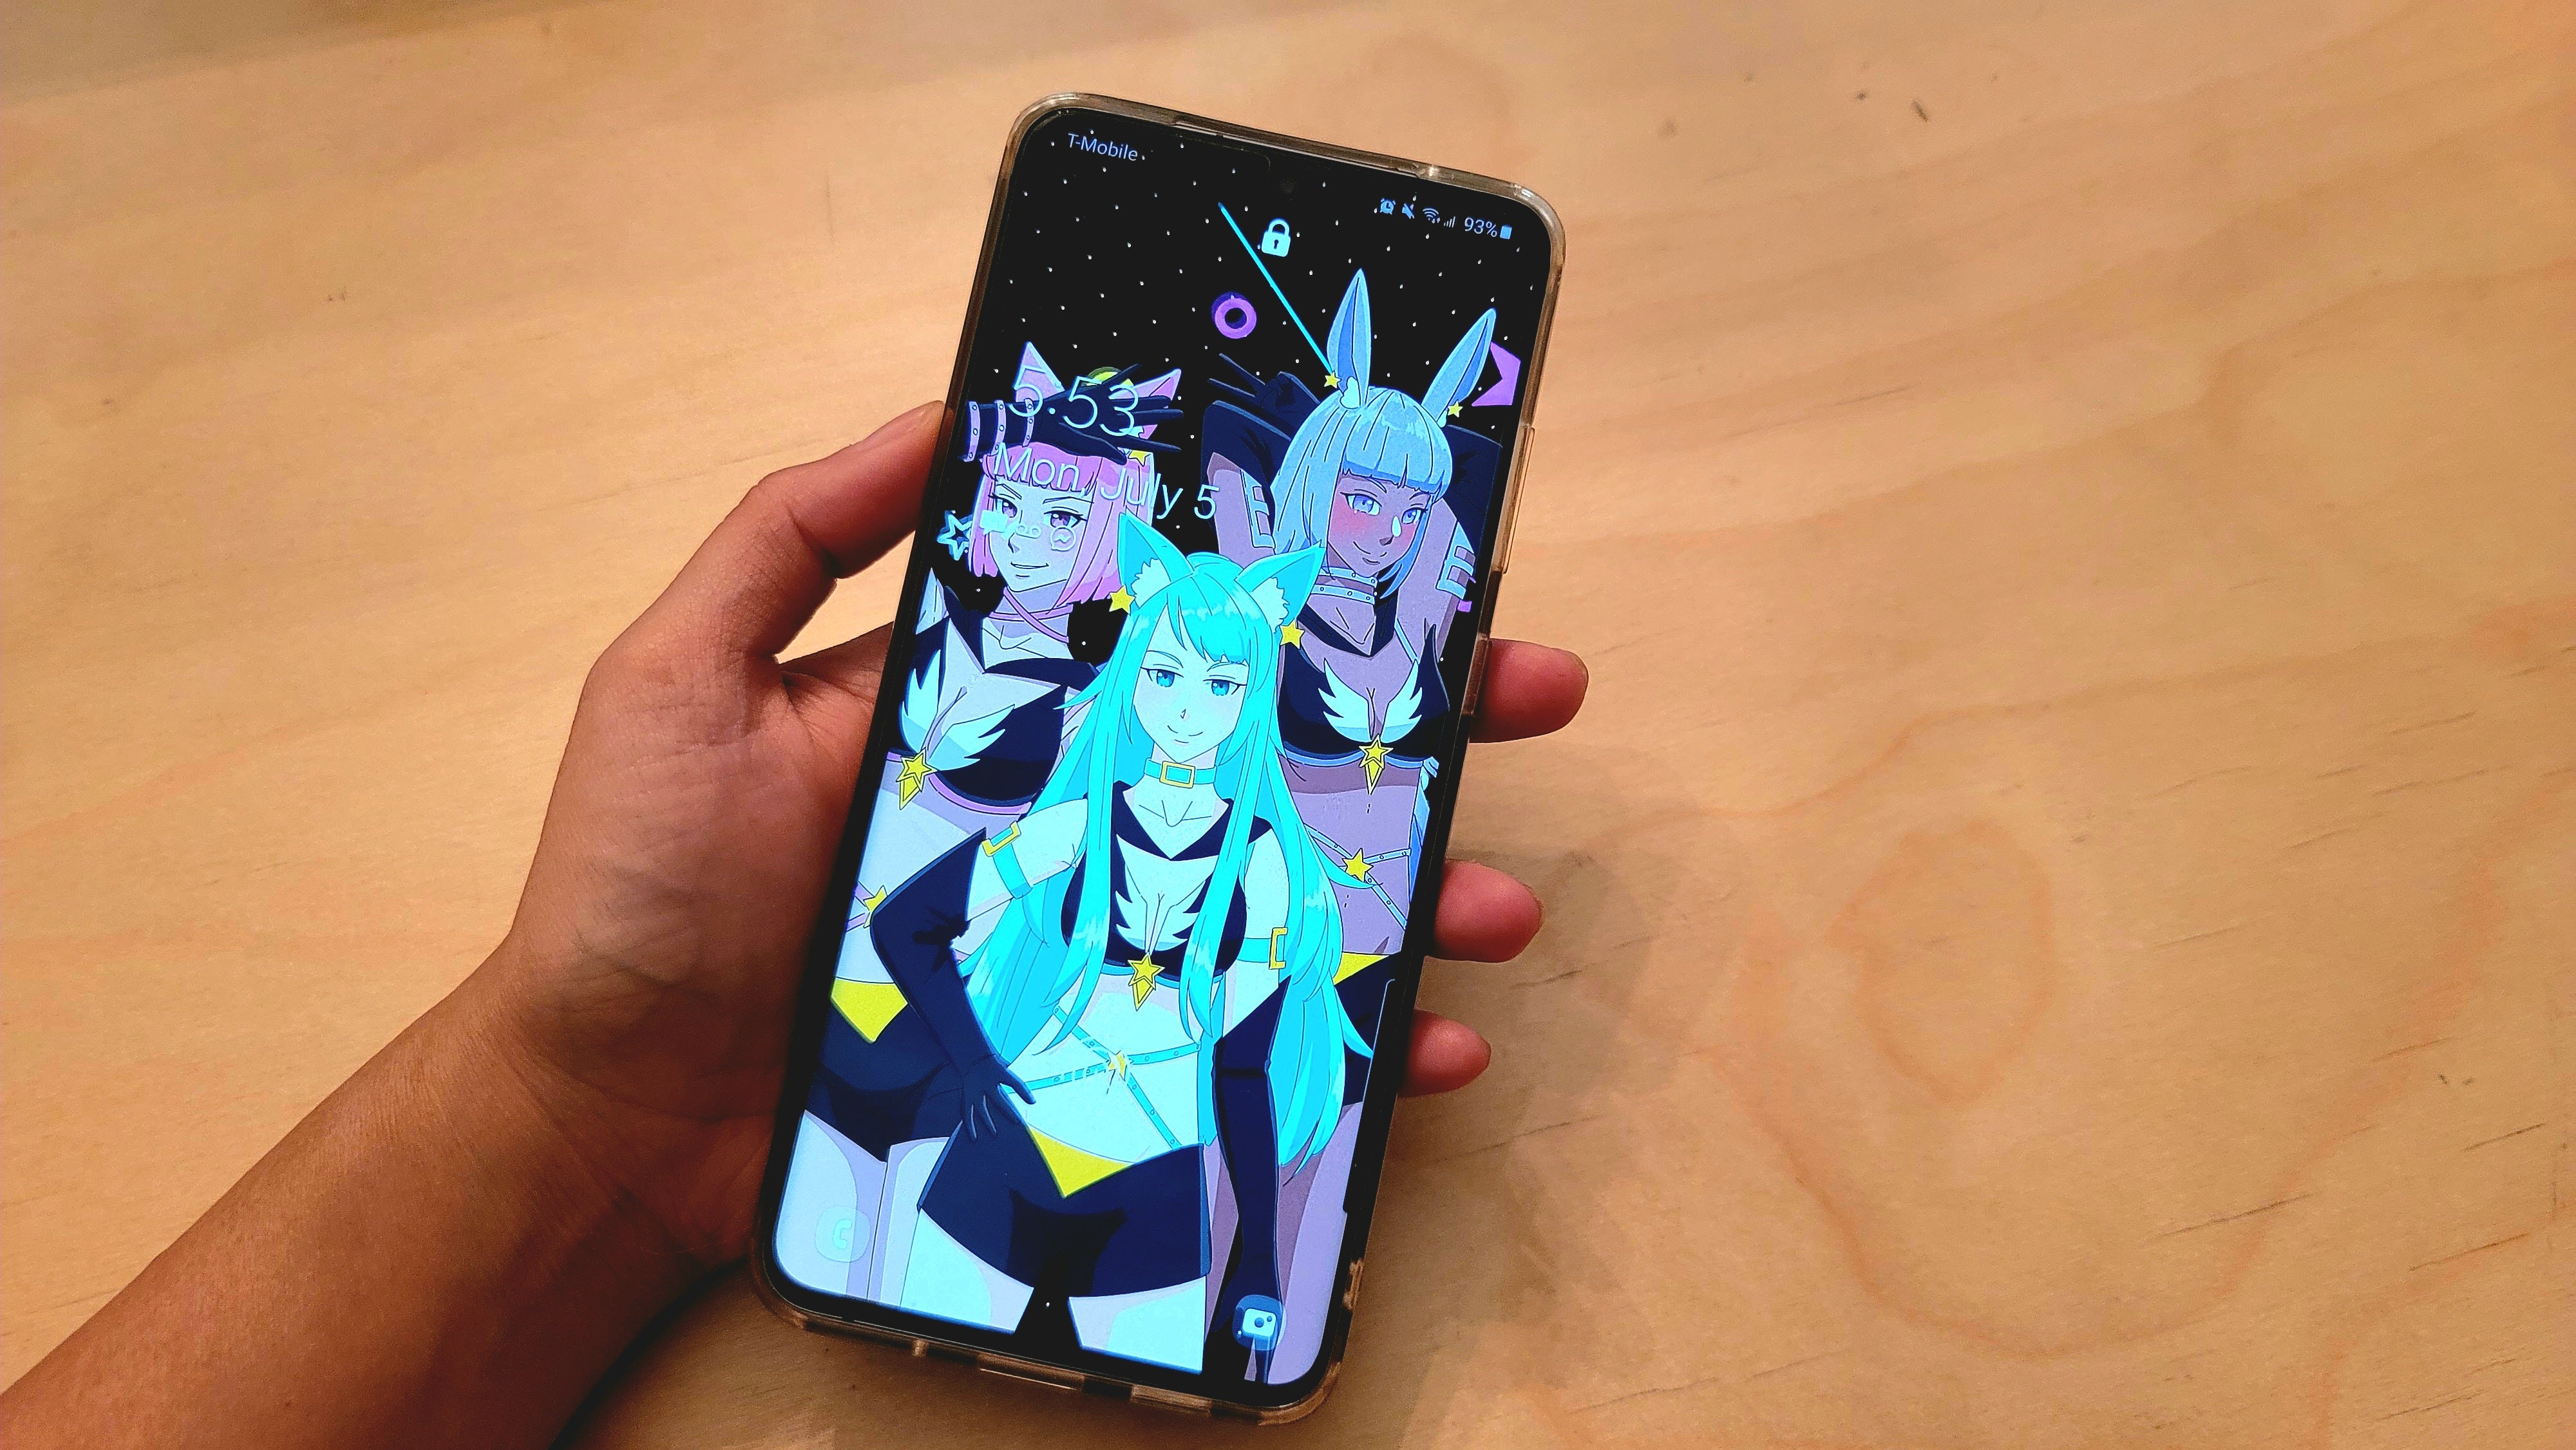 How To Use Holic Mode Animated Wallpapers on Your Phone